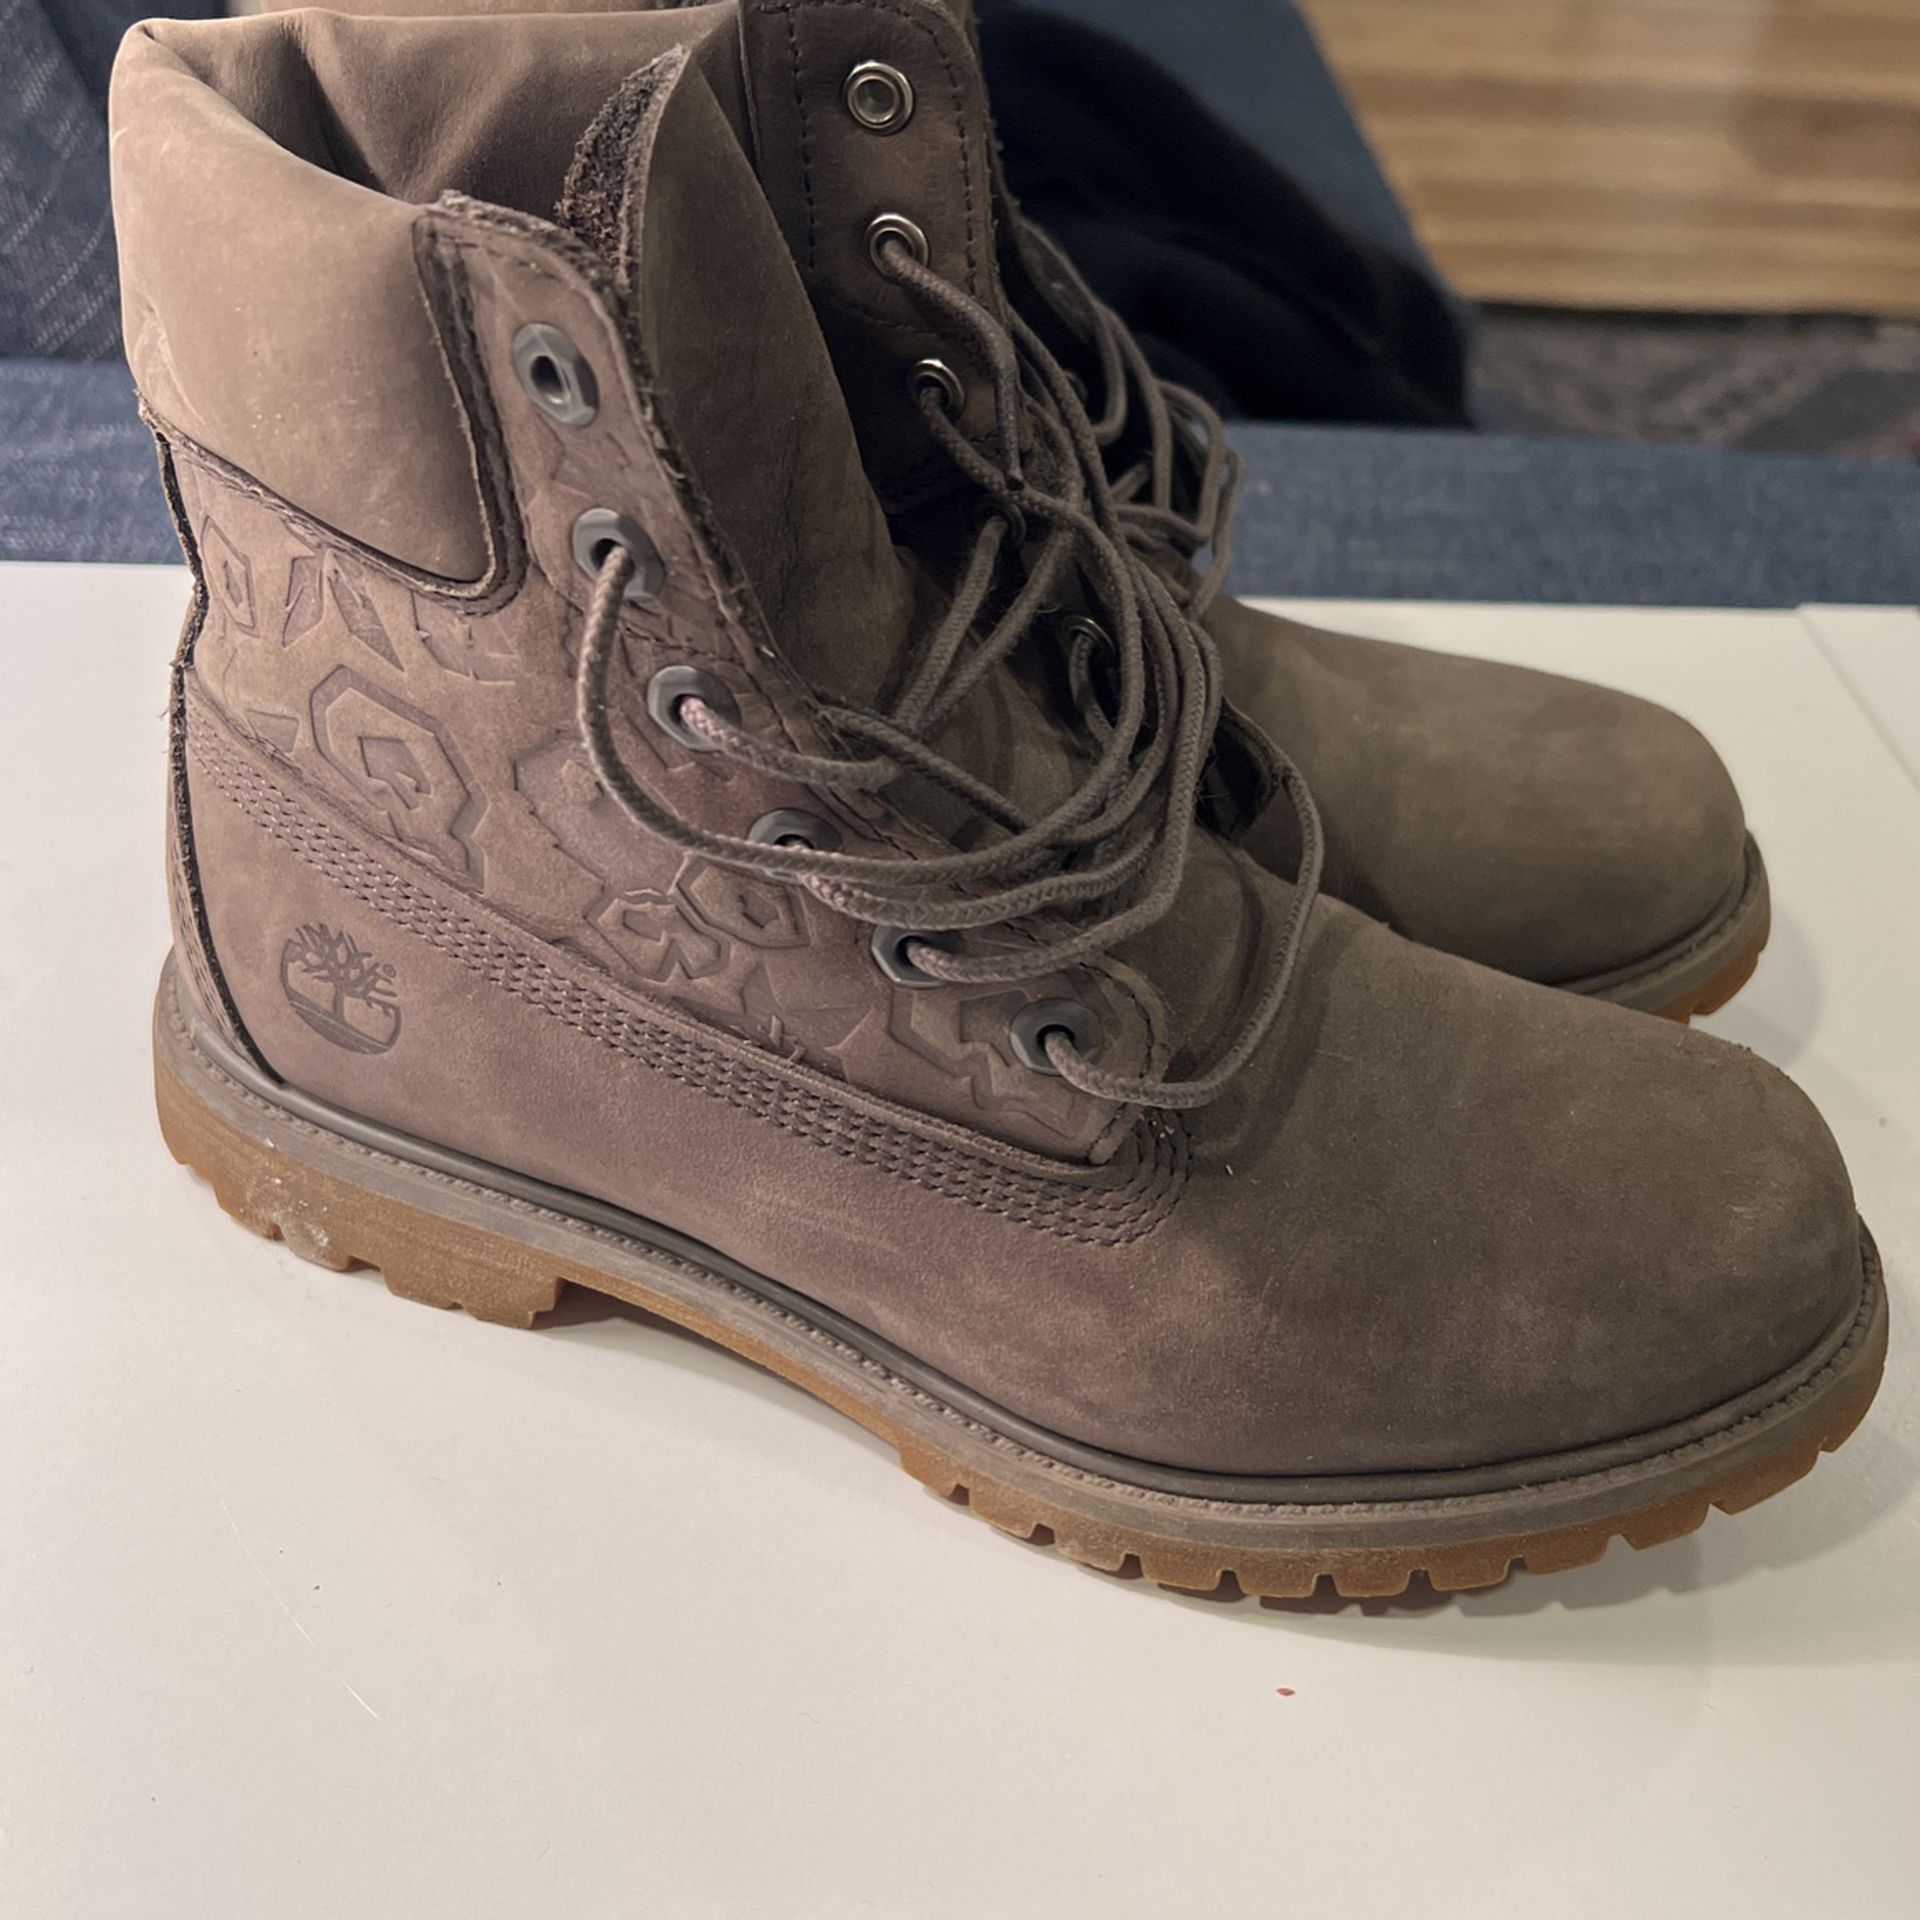 Woman’s Timberlands Size 8.5